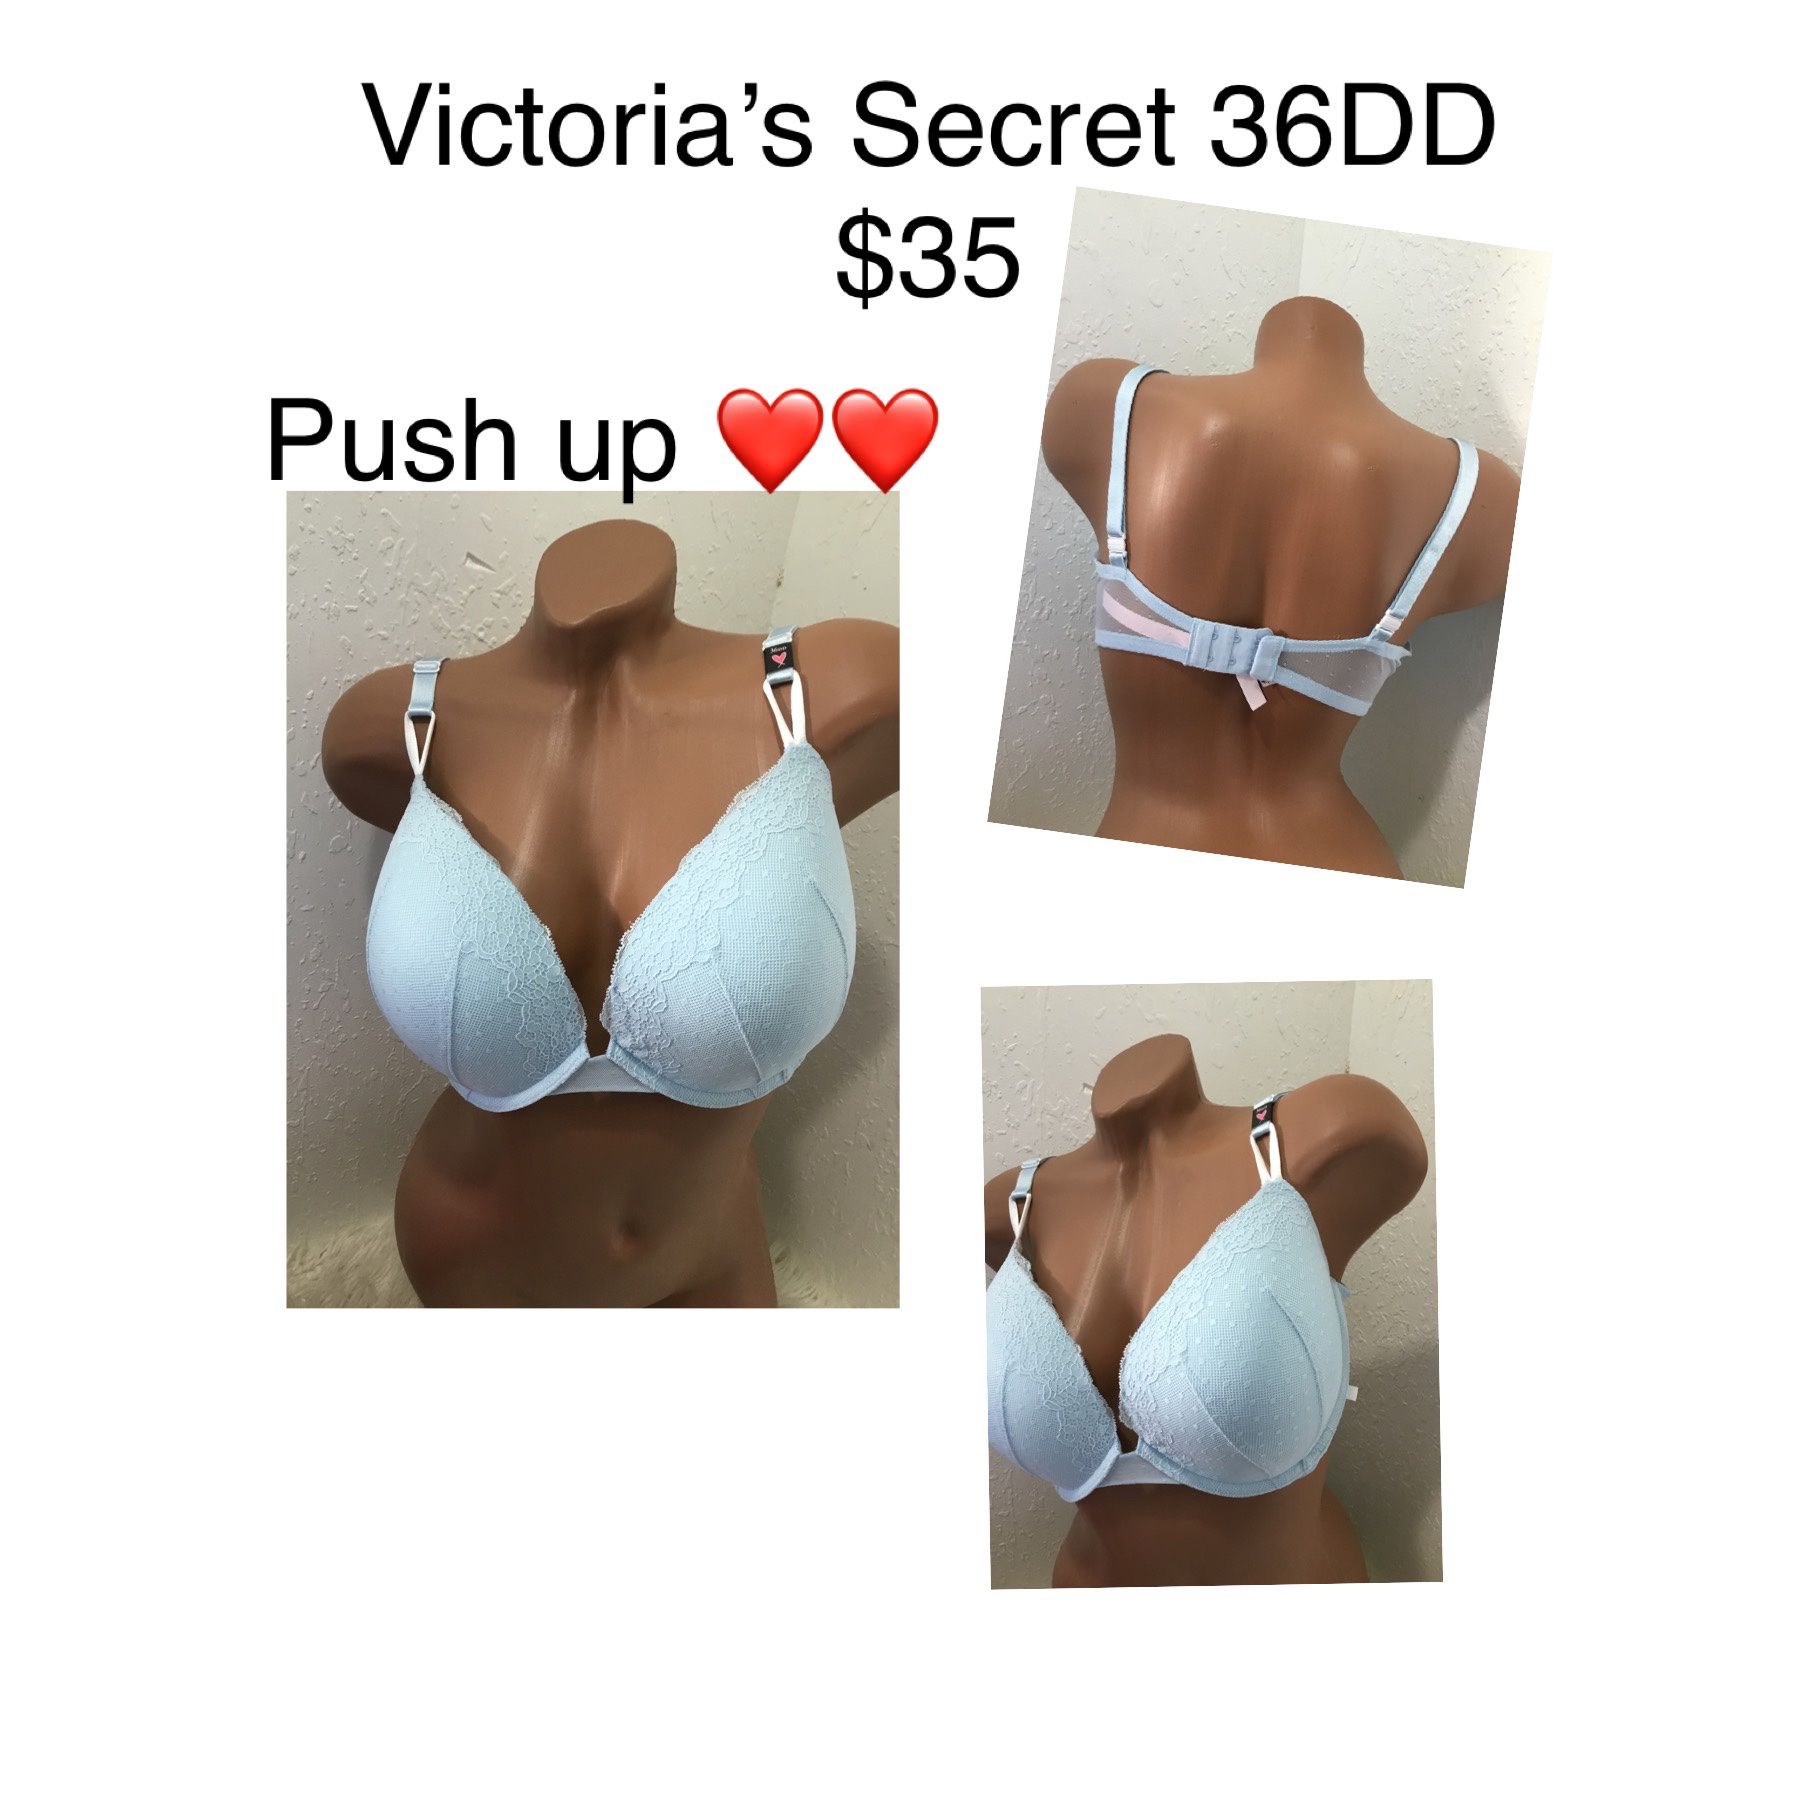 New Bra Victoria Secret 36dd Push Up firm Price for Sale in Los Angeles, CA  - OfferUp